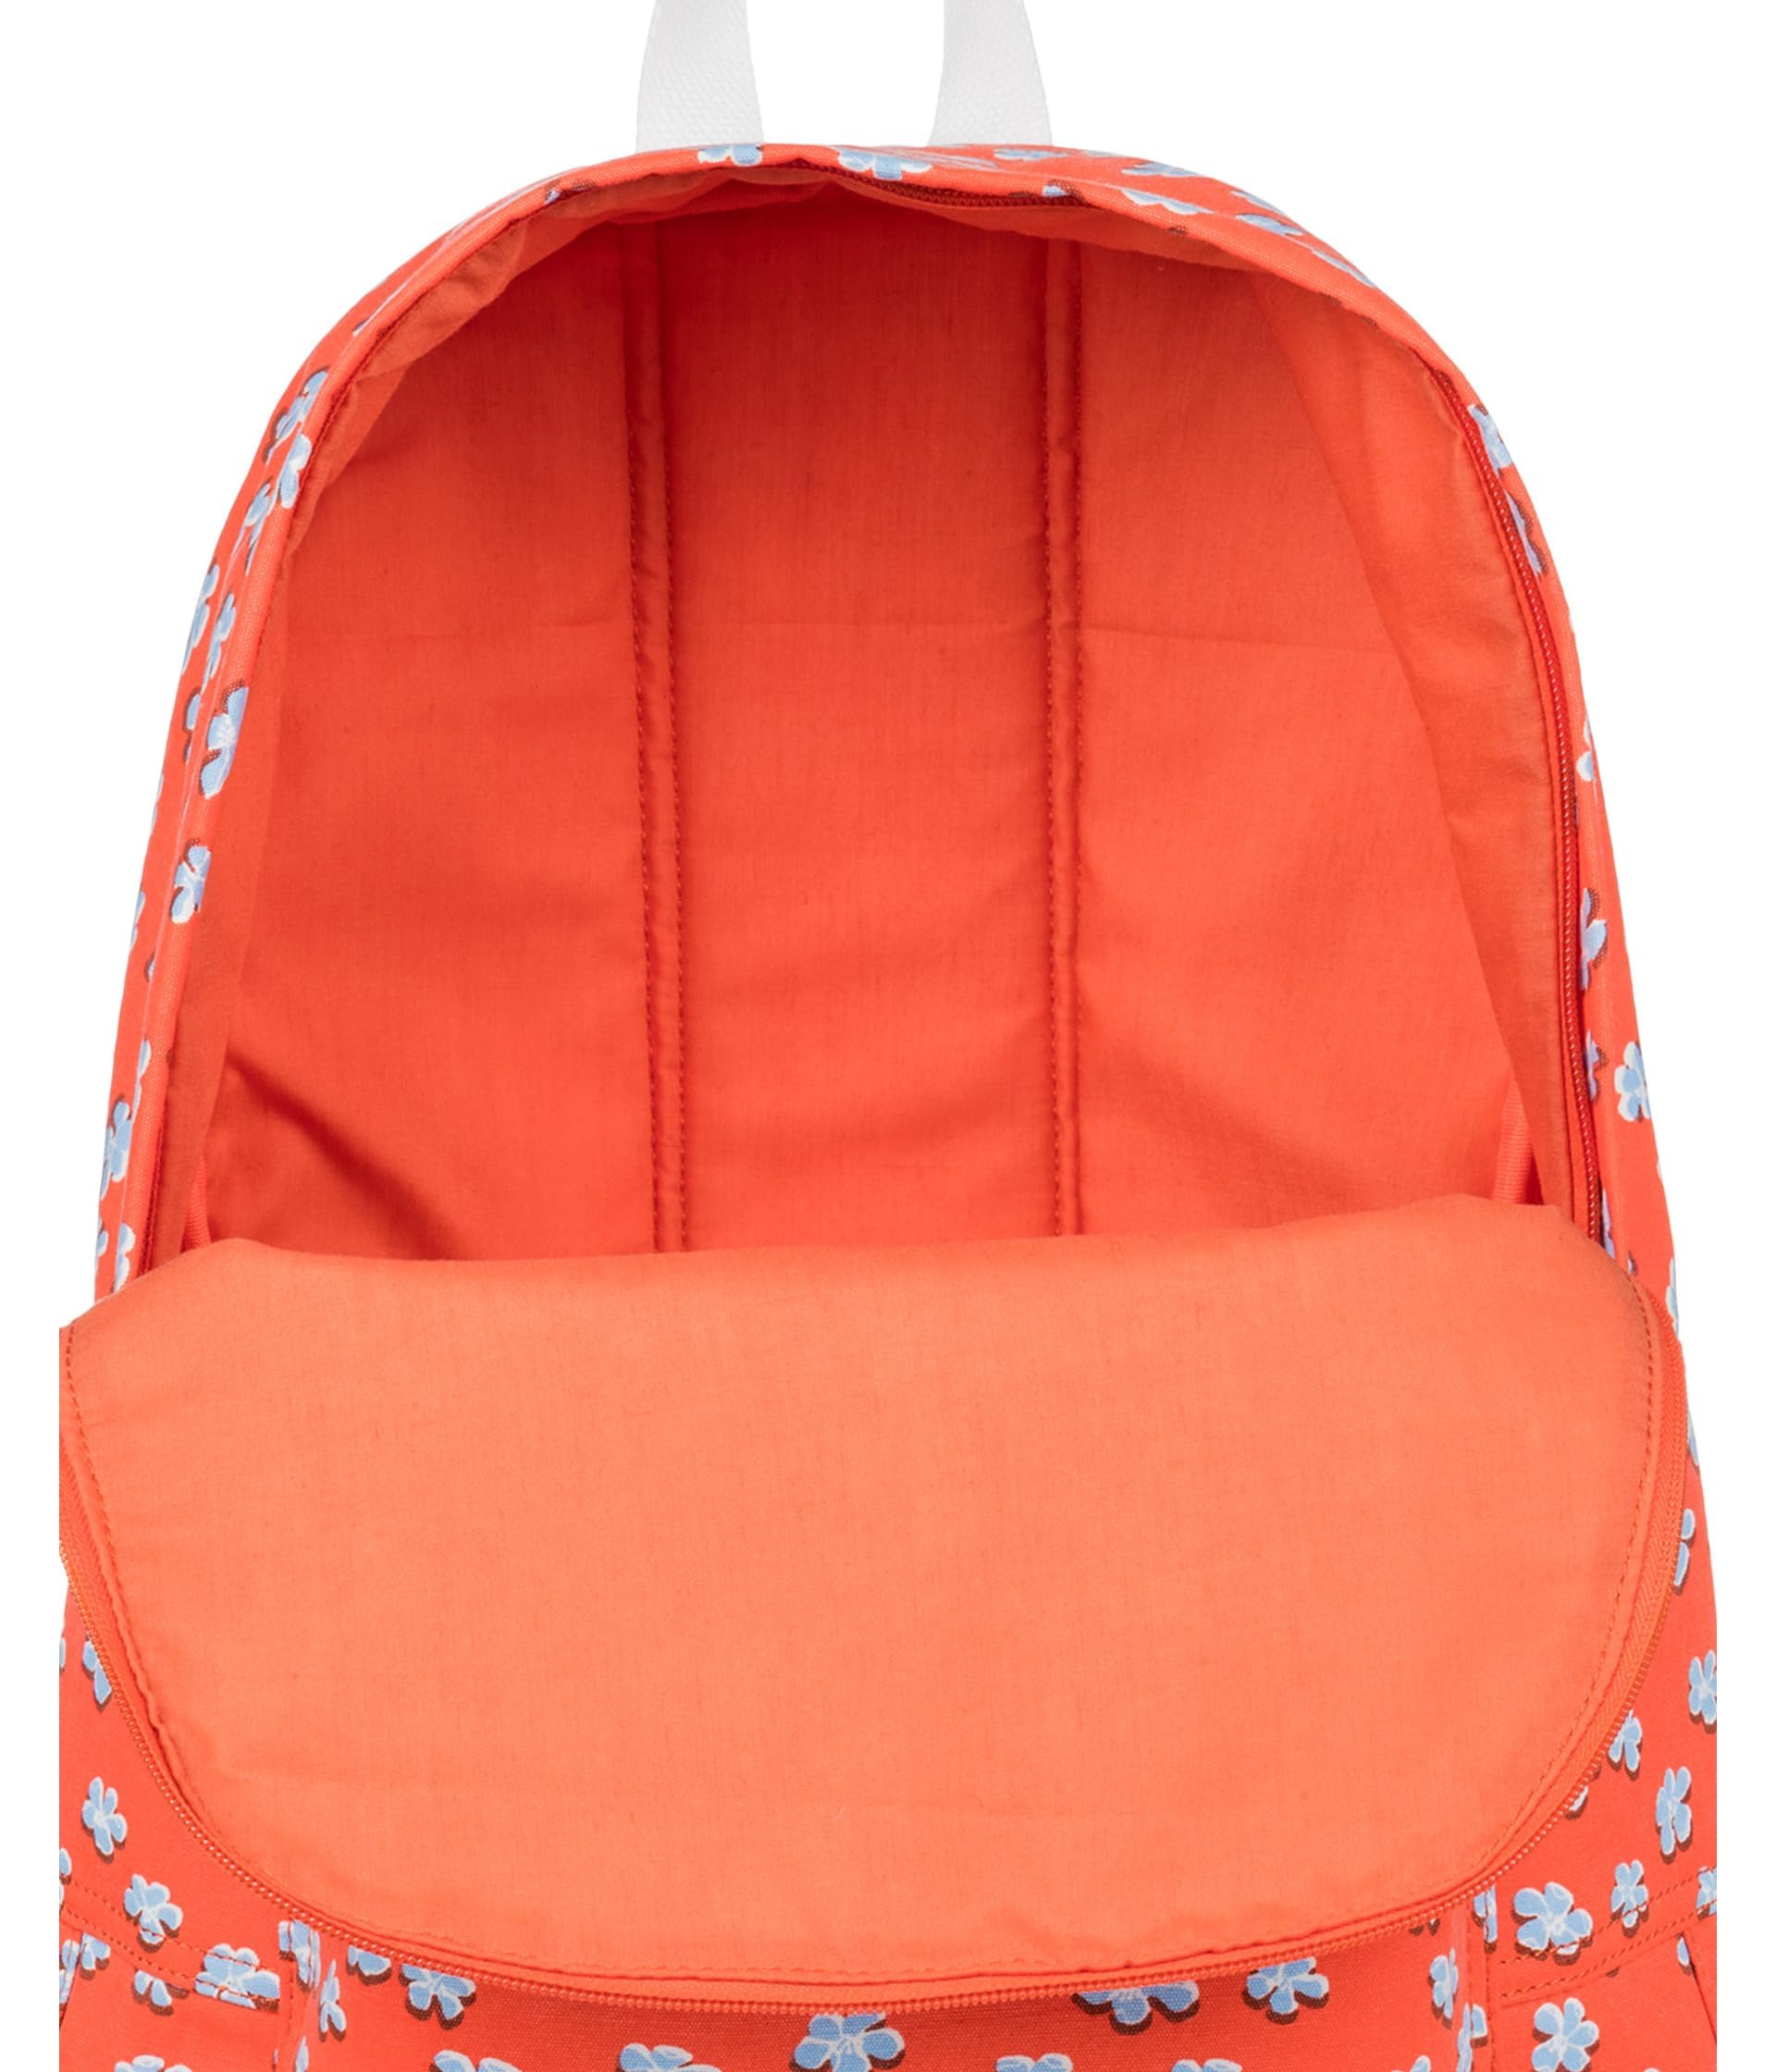 Roxy Women's Sugar Baby Canvas Backpack, Tiger Lily Flower Rain, One Size